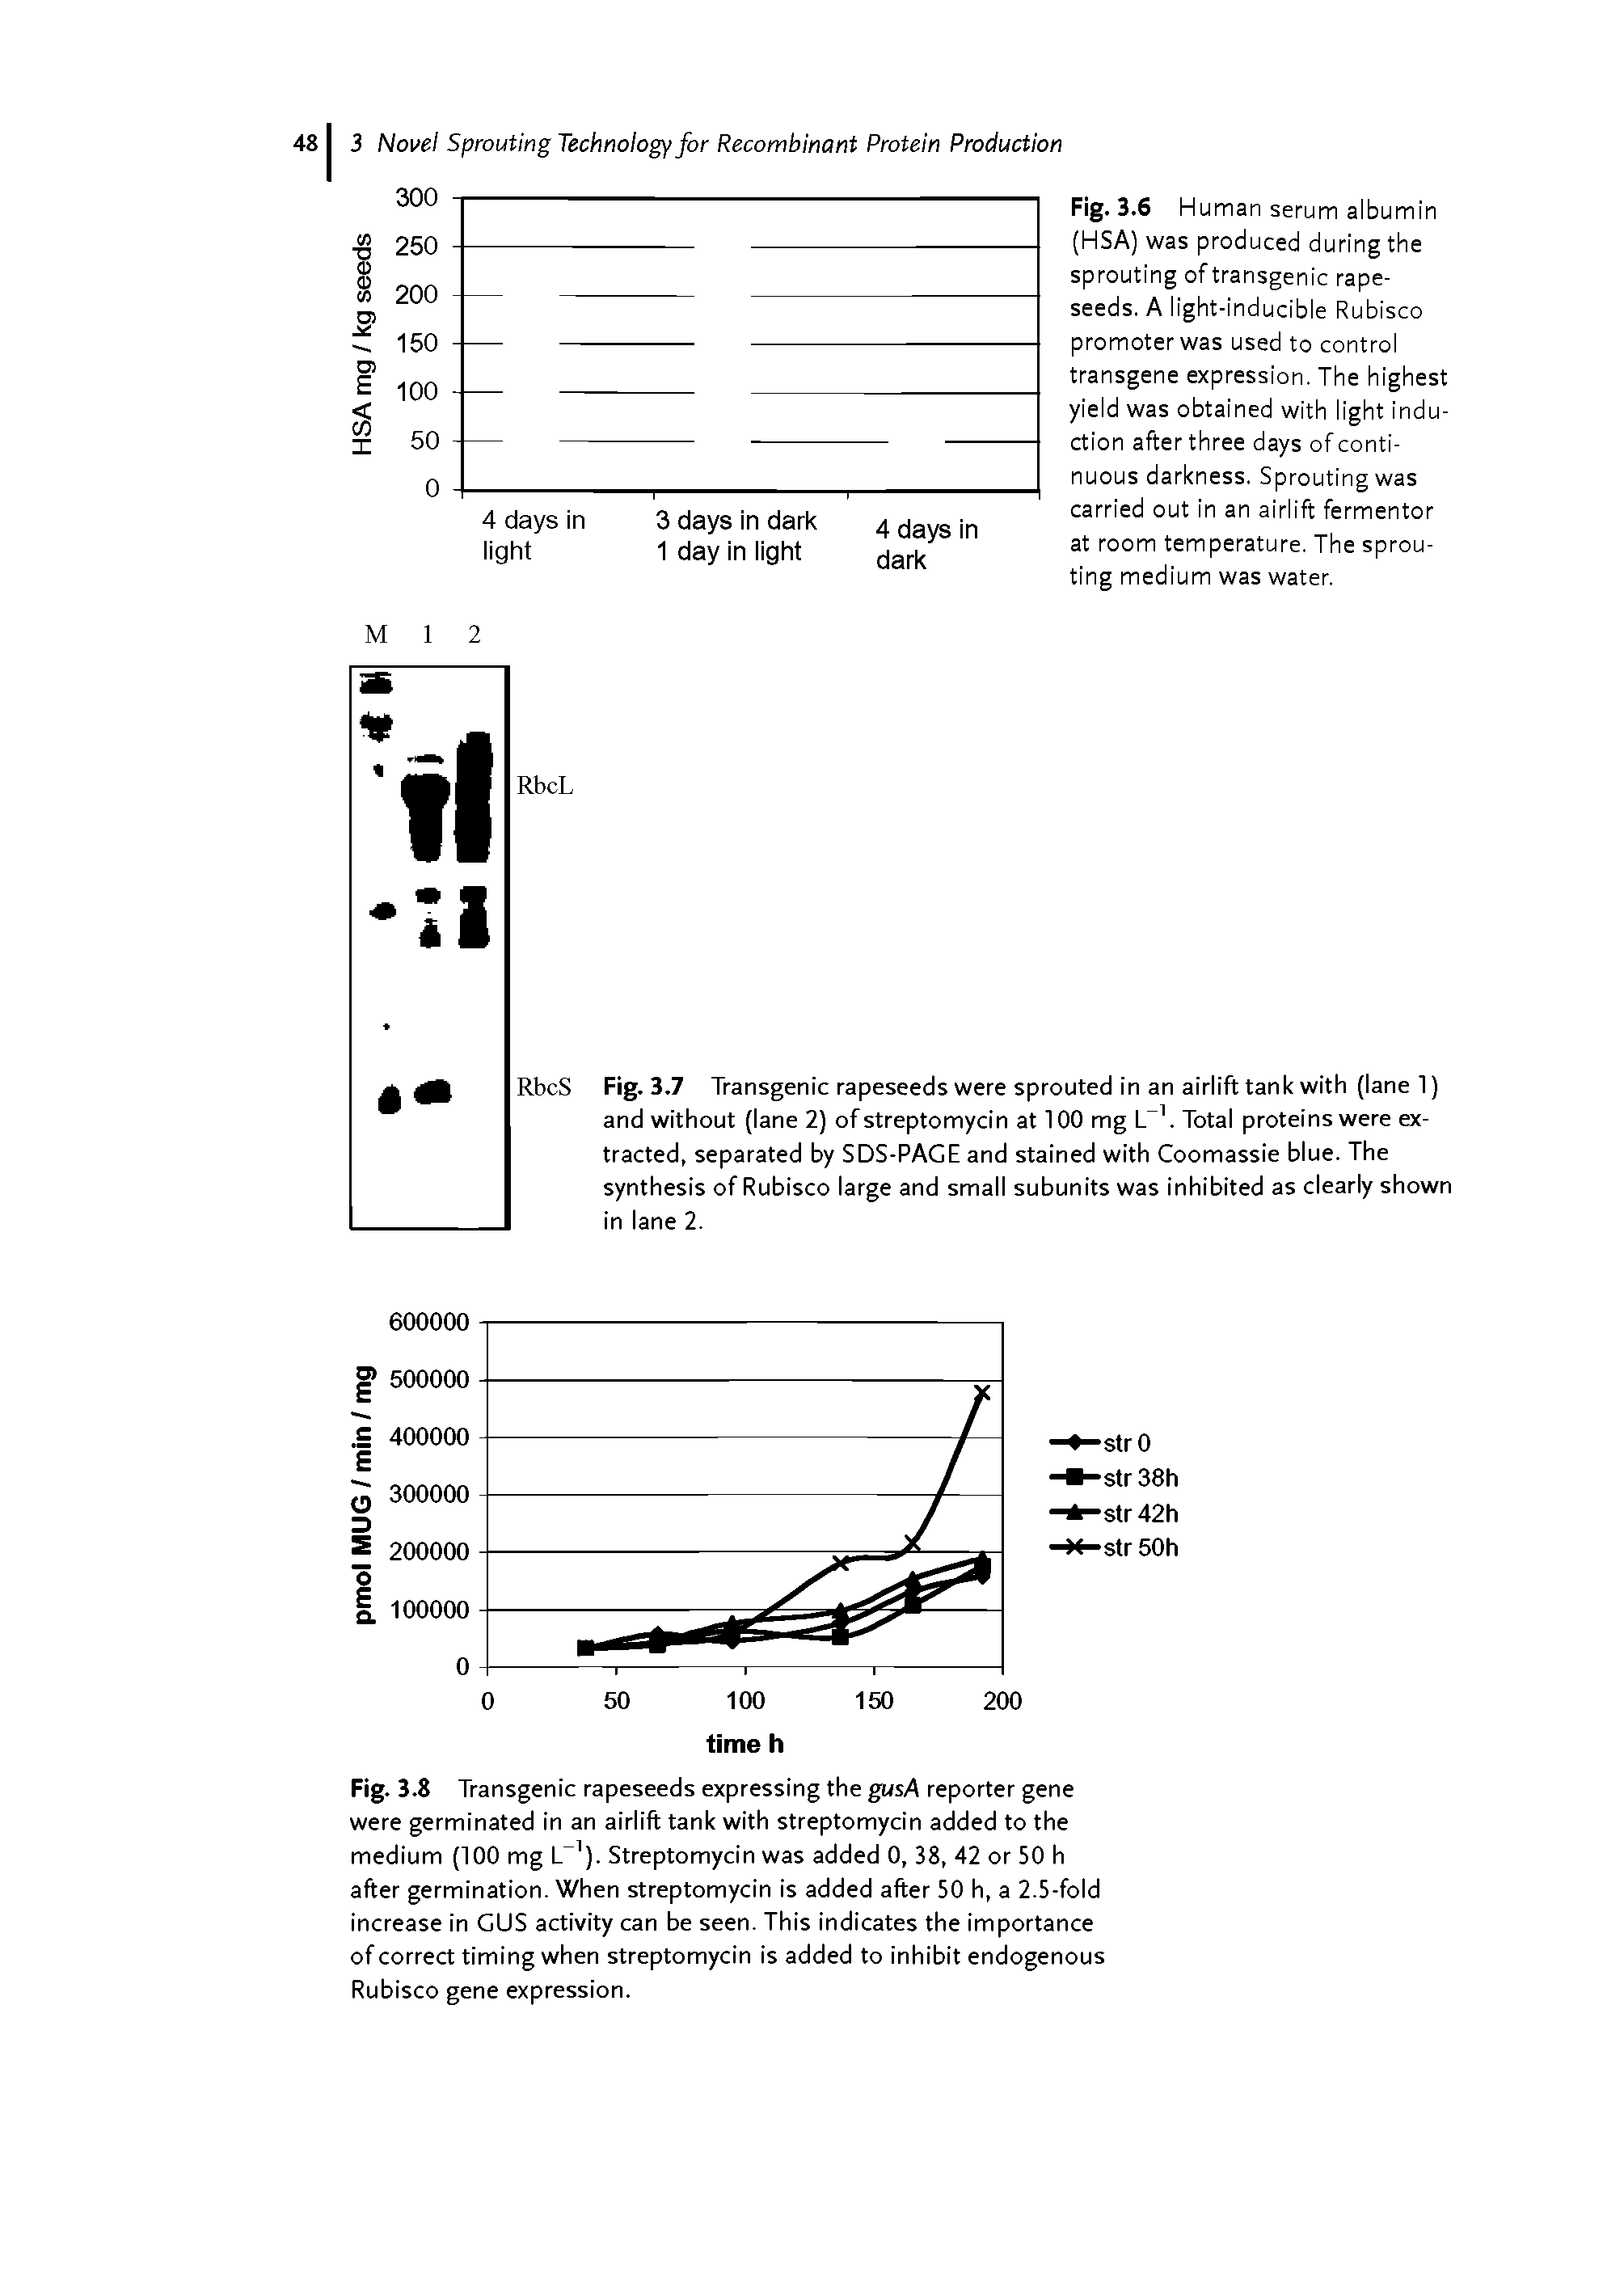 Fig. 3.8 Transgenic rapeseeds expressing the gusA reporter gene were germinated in an airlift tank with streptomycin added to the medium (100 mg L 1). Streptomycin was added 0, 38, 42 or 50 h after germination. When streptomycin is added after 50 h, a 2.5-fold increase in GUS activity can be seen. This indicates the importance of correct timing when streptomycin is added to inhibit endogenous Rubisco gene expression.